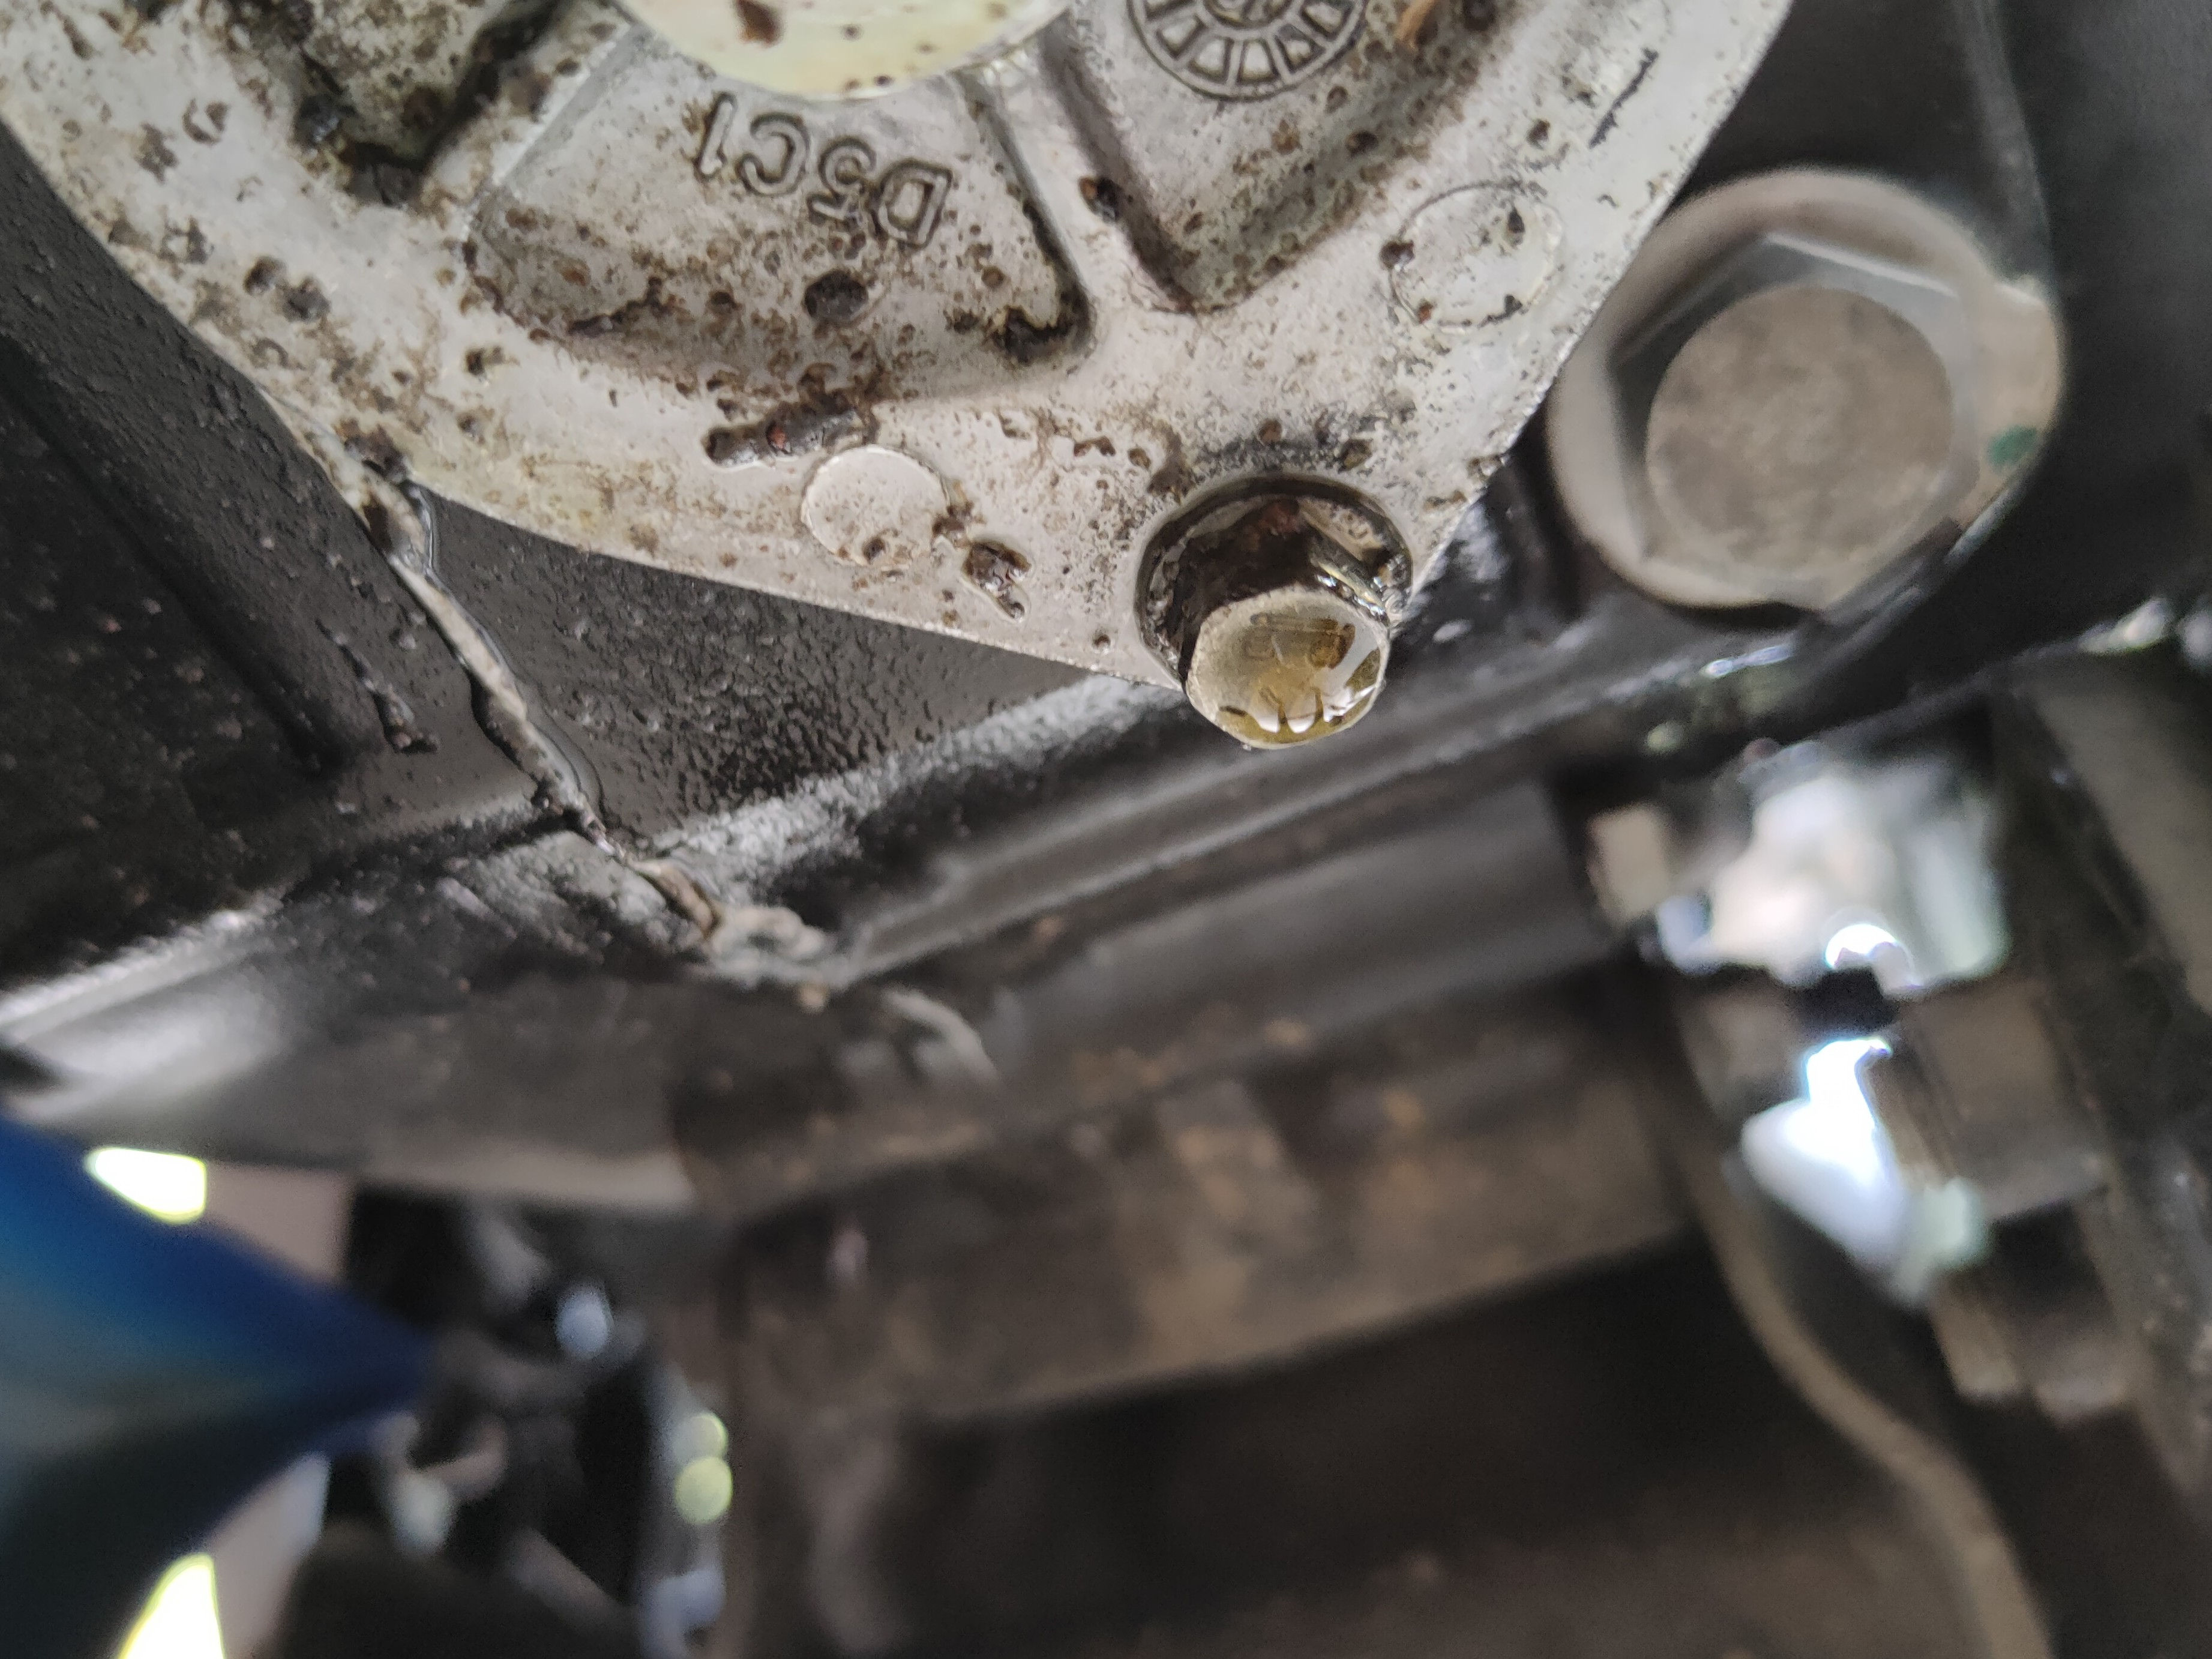 There is oil leakage in the engine. What could be the reason ?